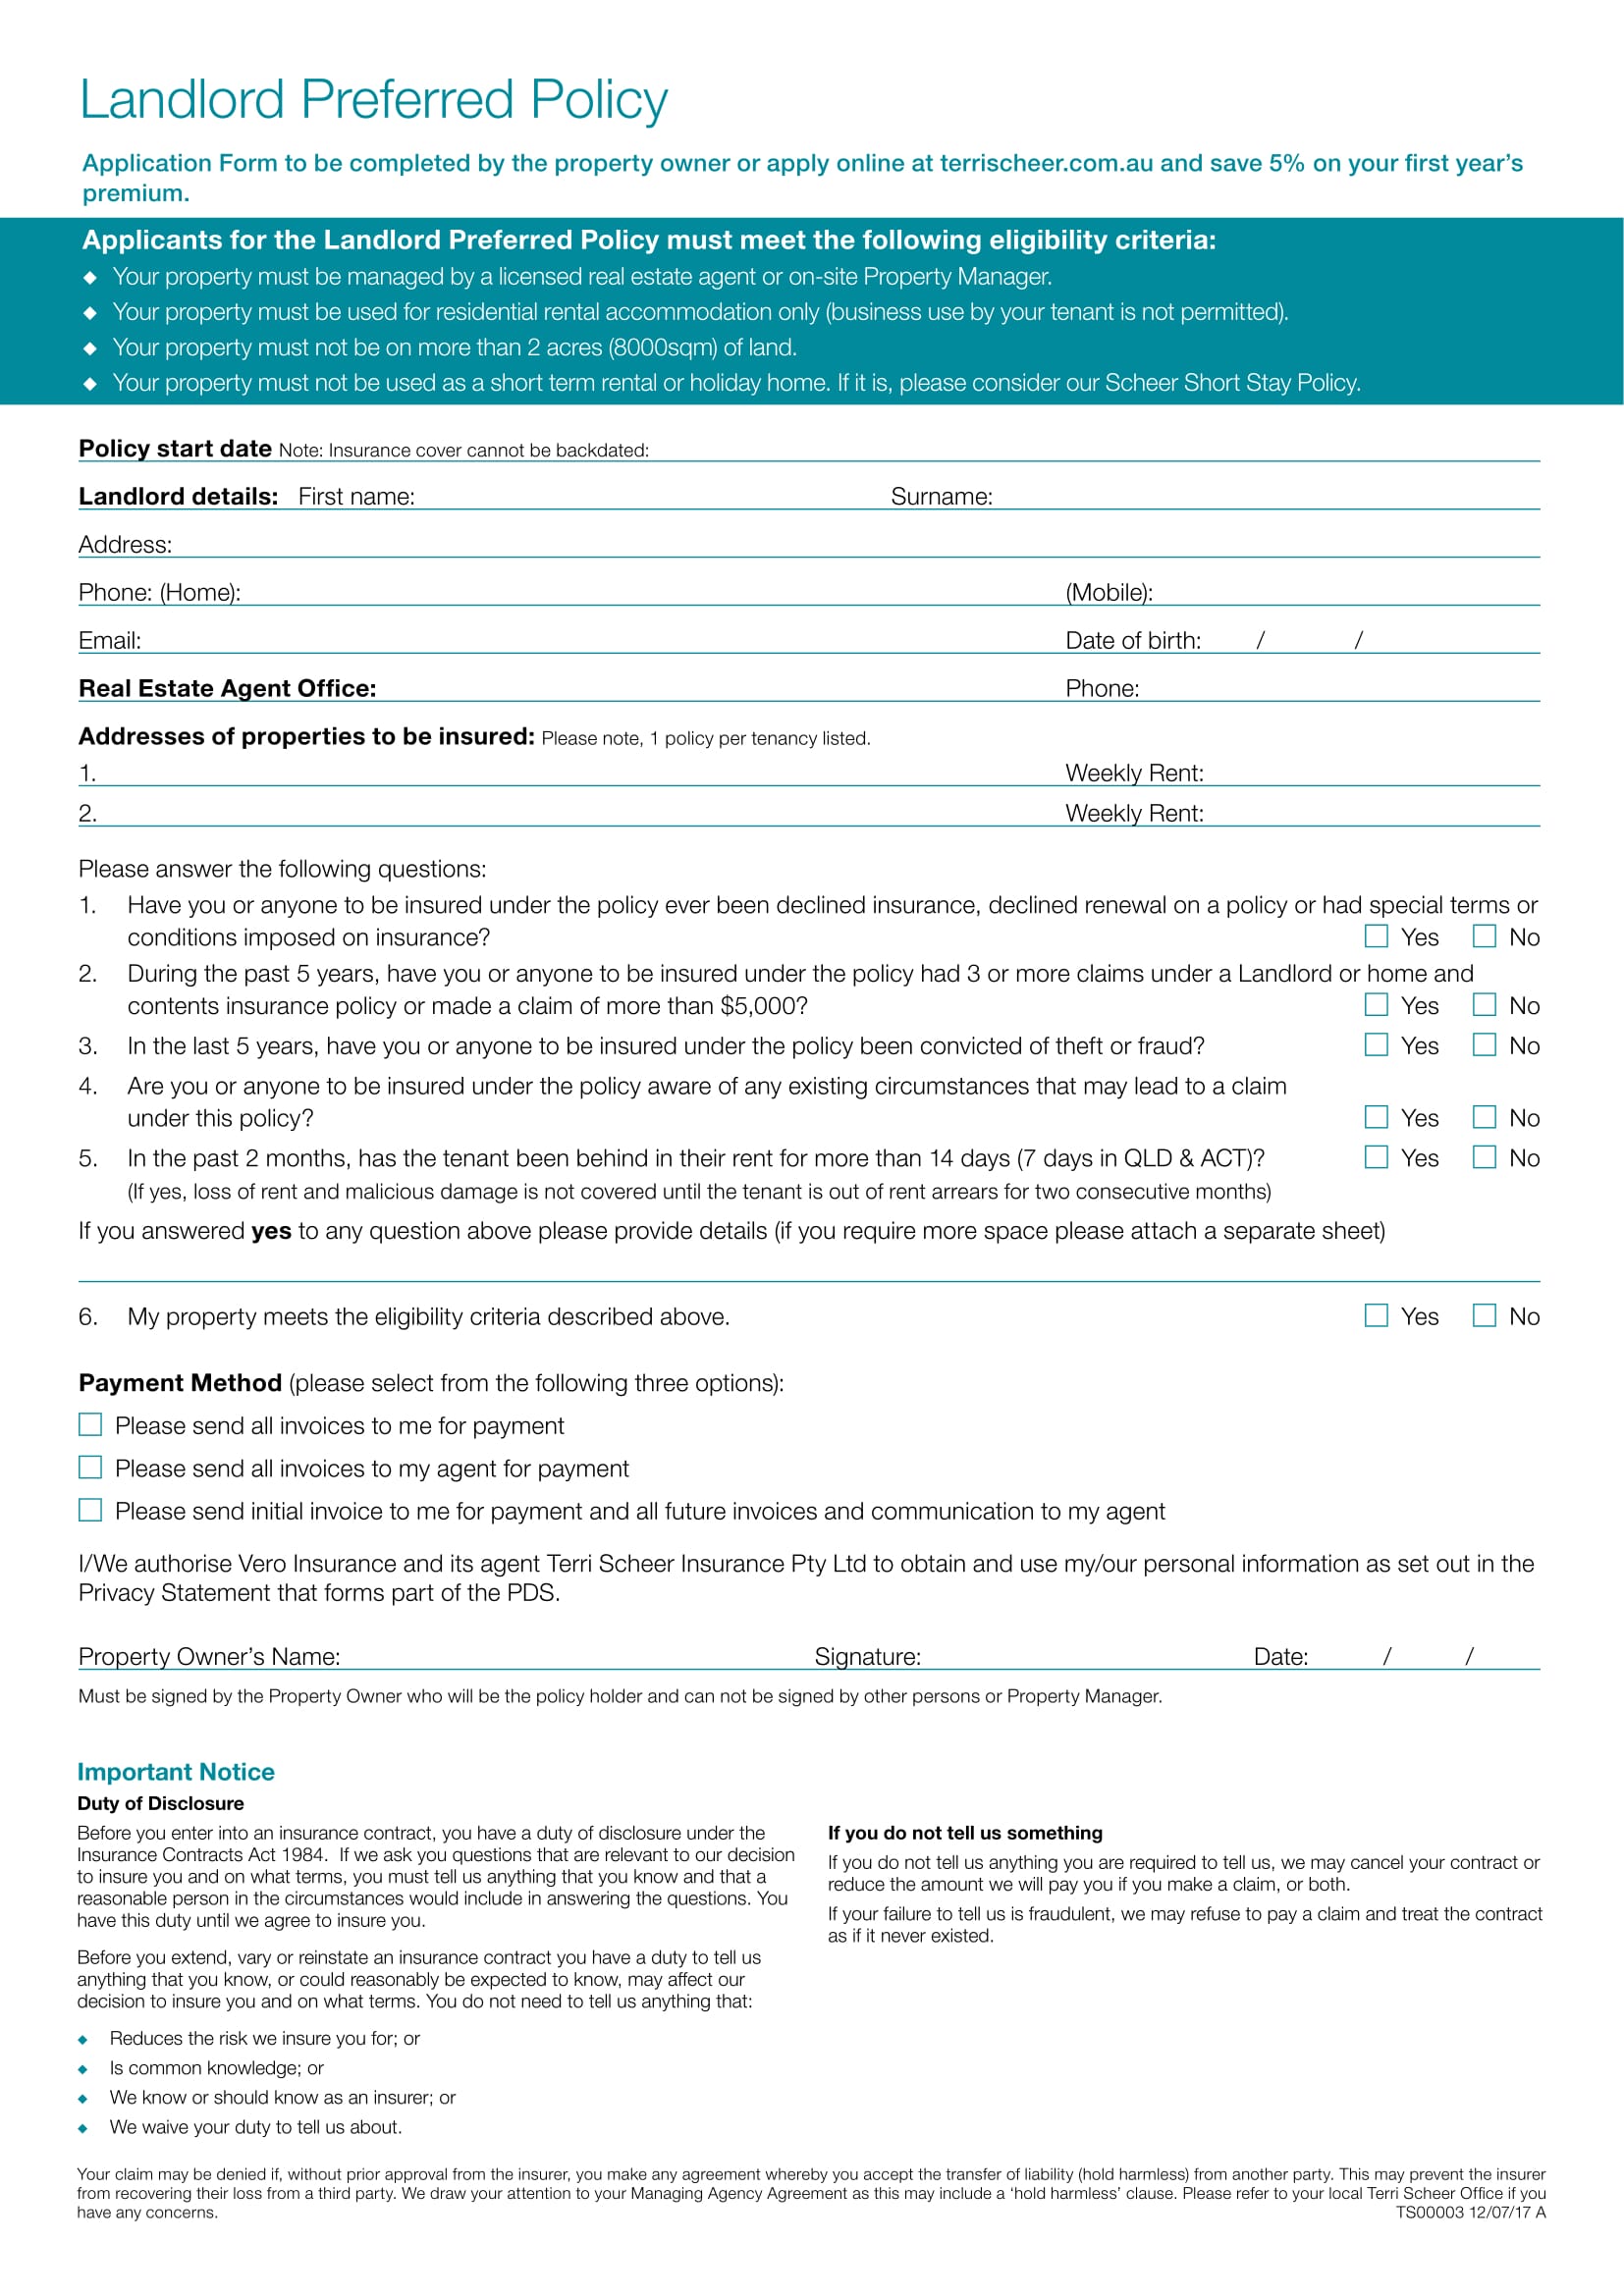 landlord preferred policy application form 2